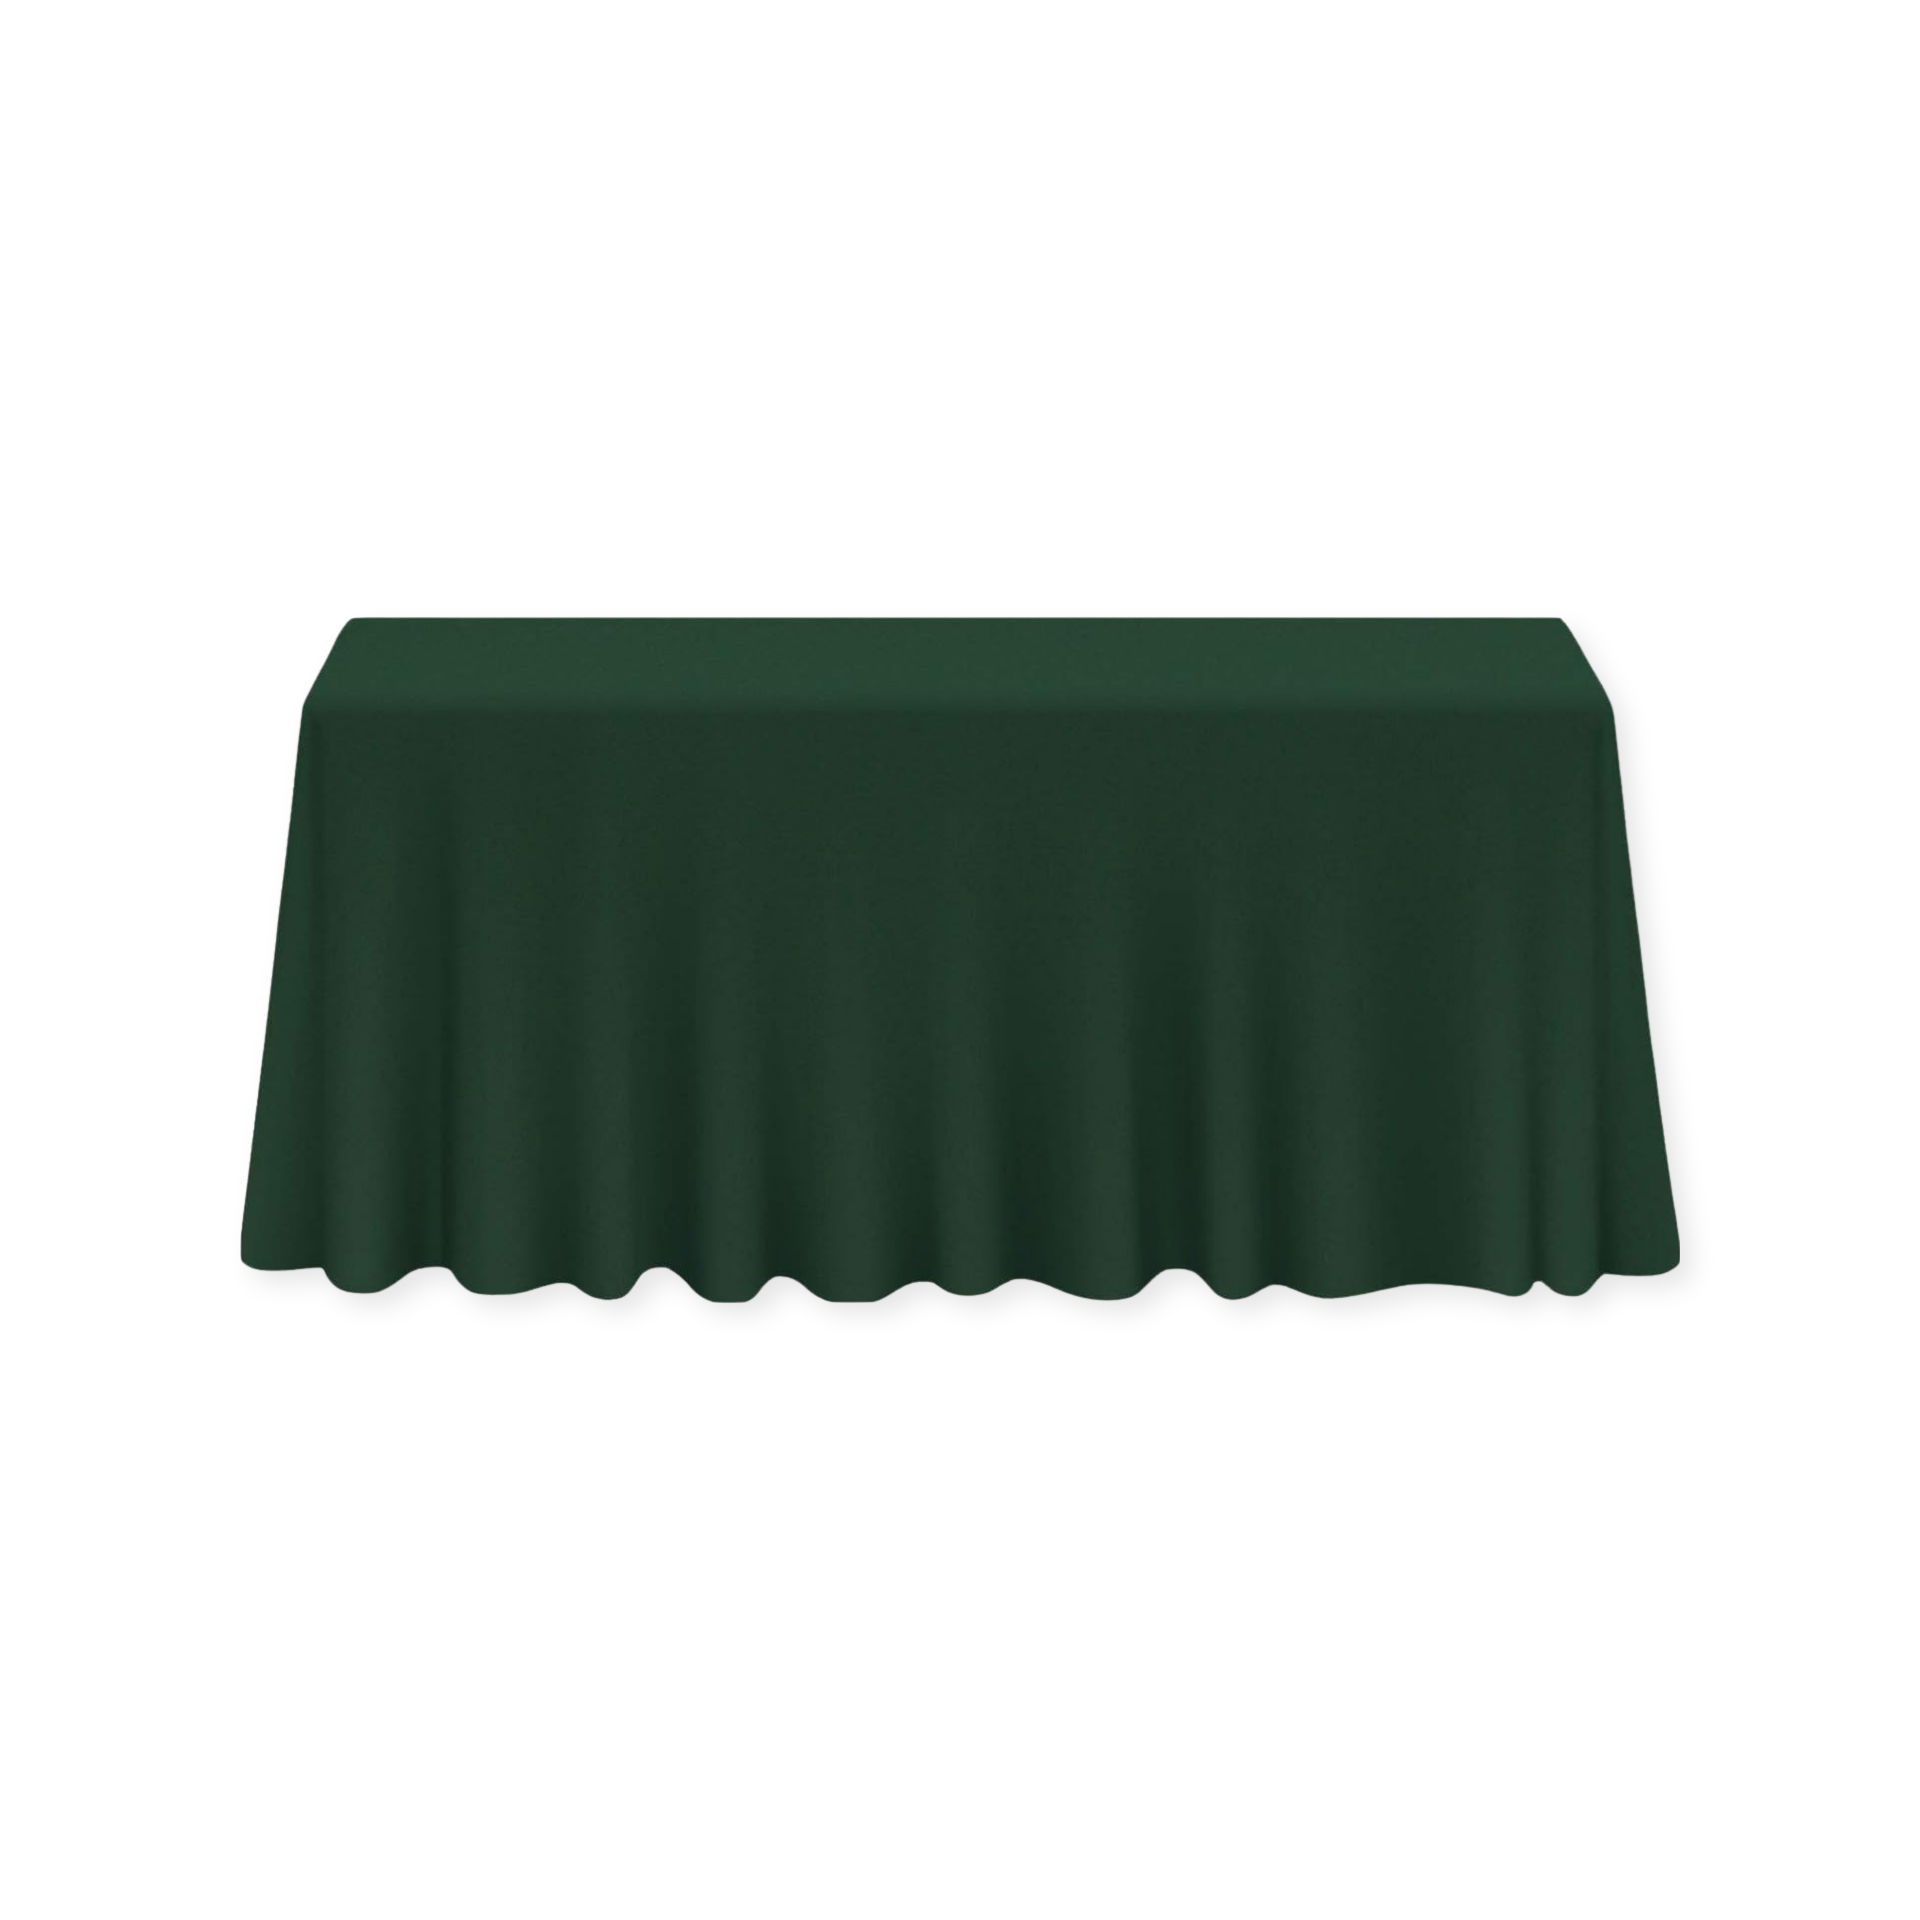 Tablecloth polyester rectangle emerald green commercial grade wedding party event rental panama city beach